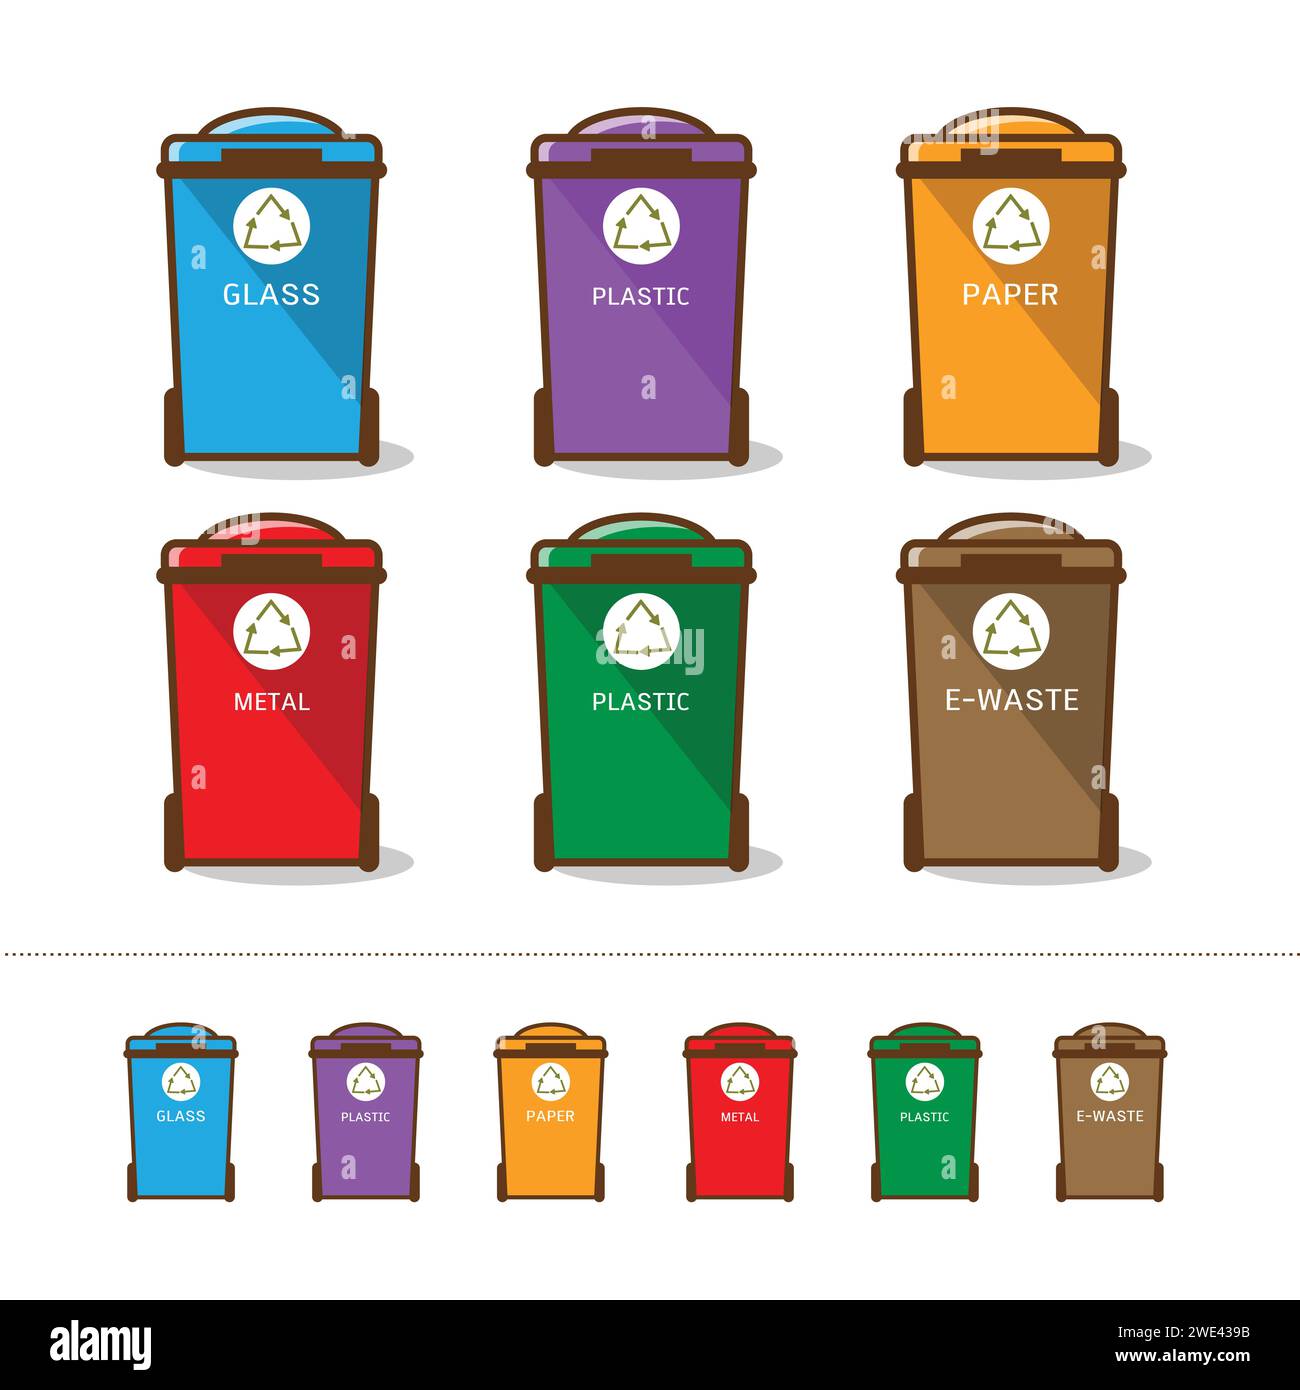 Waste segregation and garbage recycling sorts and categories. Colored recycle bin vector illustrations. Plastic, organic, glass, electronic waste, pap Stock Vector